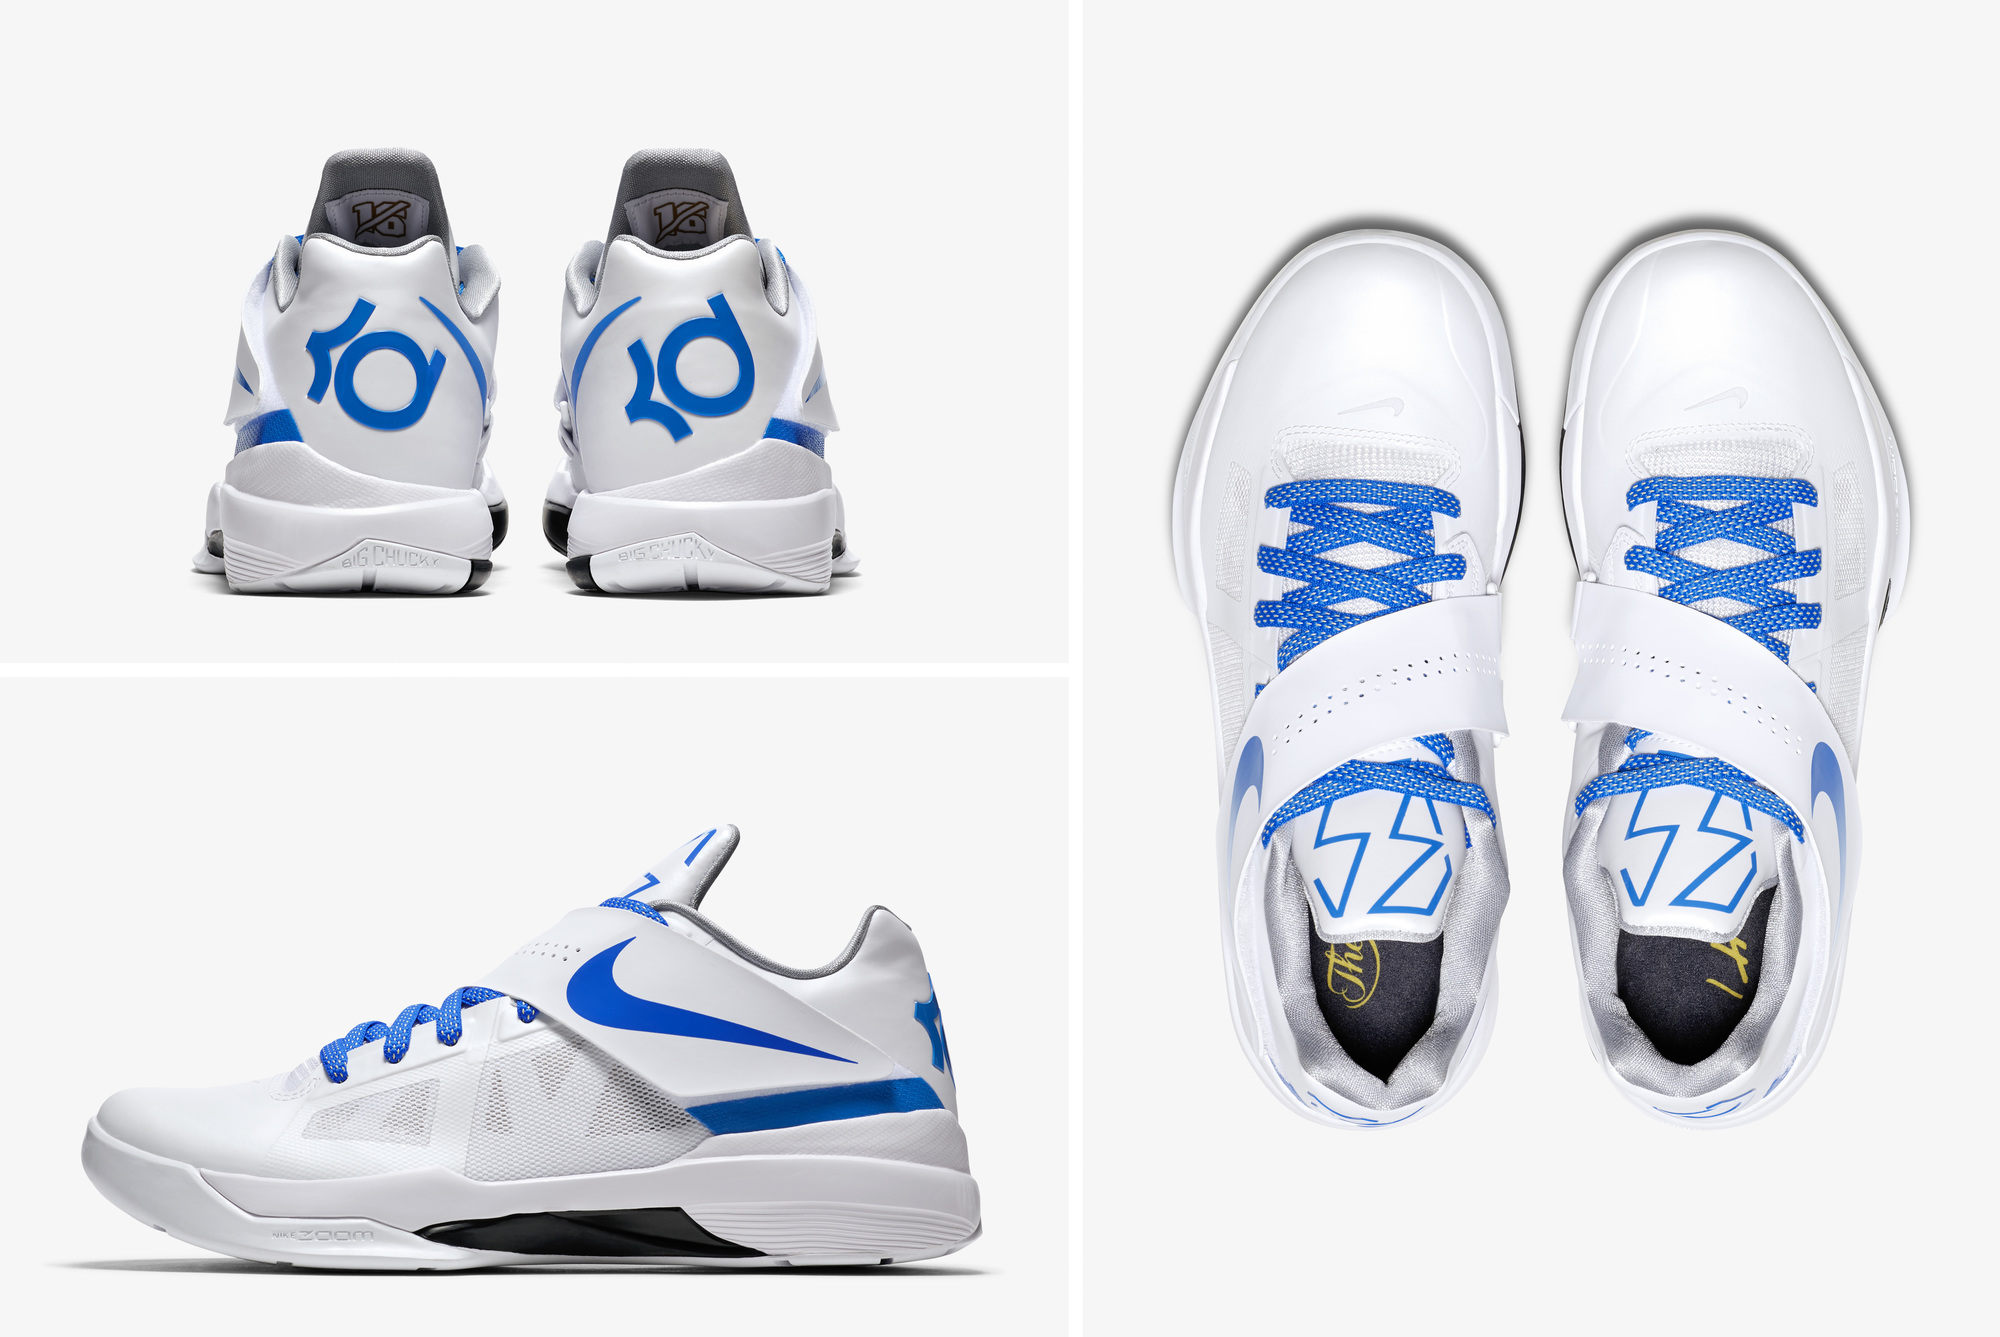 Nike Zoom KD 4 Battle Tested kevin durant